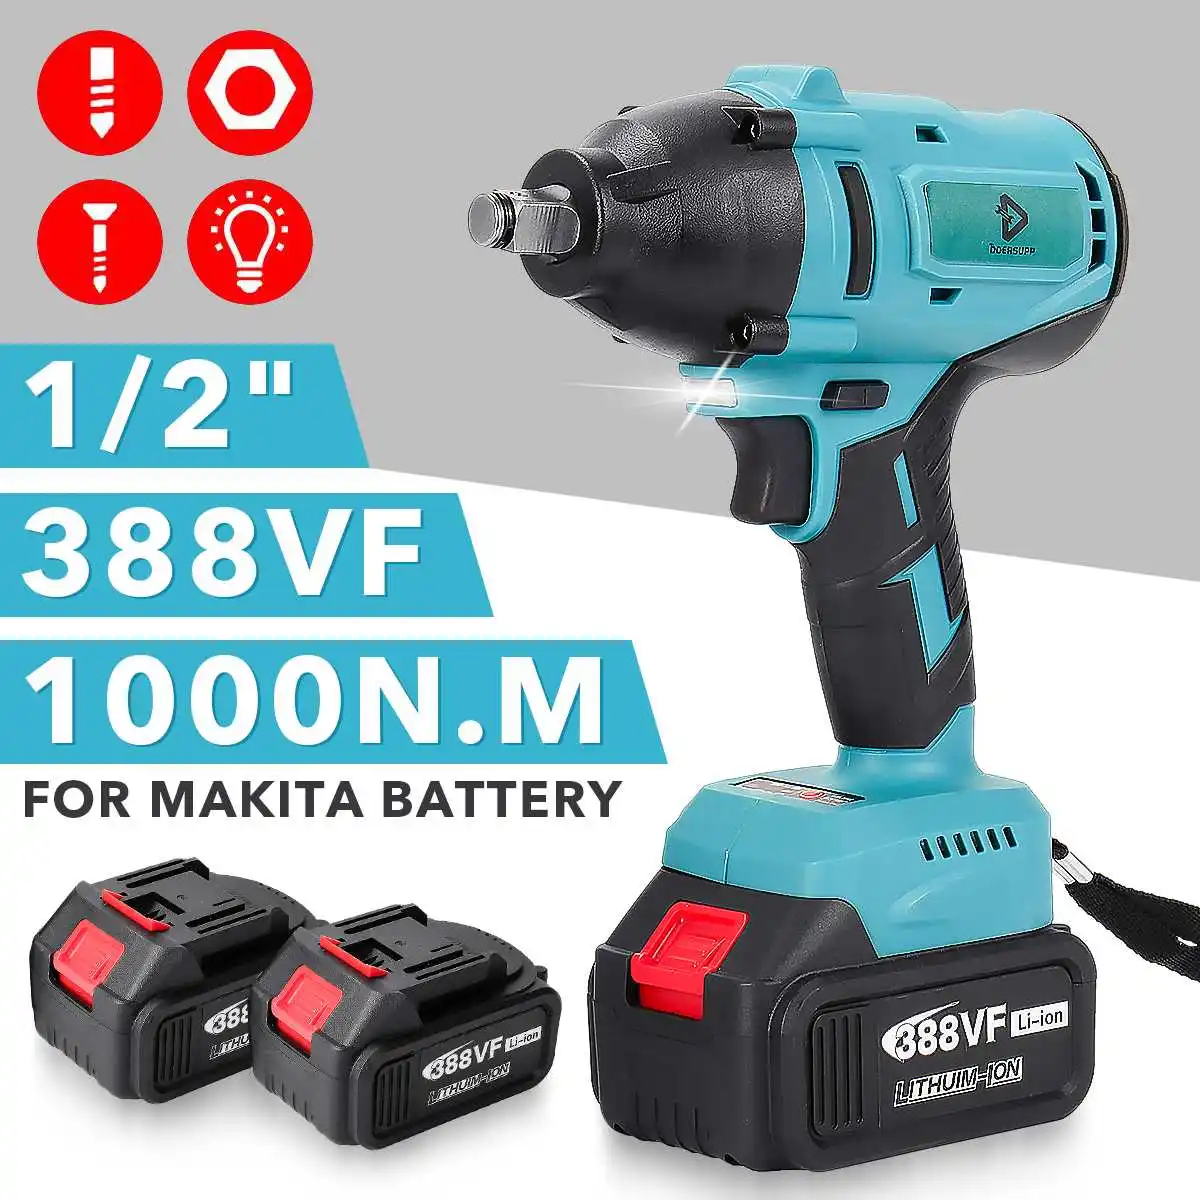 1000N.m Impact Electric Wrench Brushless Electric Screwdriver With 20000Amh Li-ion Battery Power Tool For Makita 18V Battery